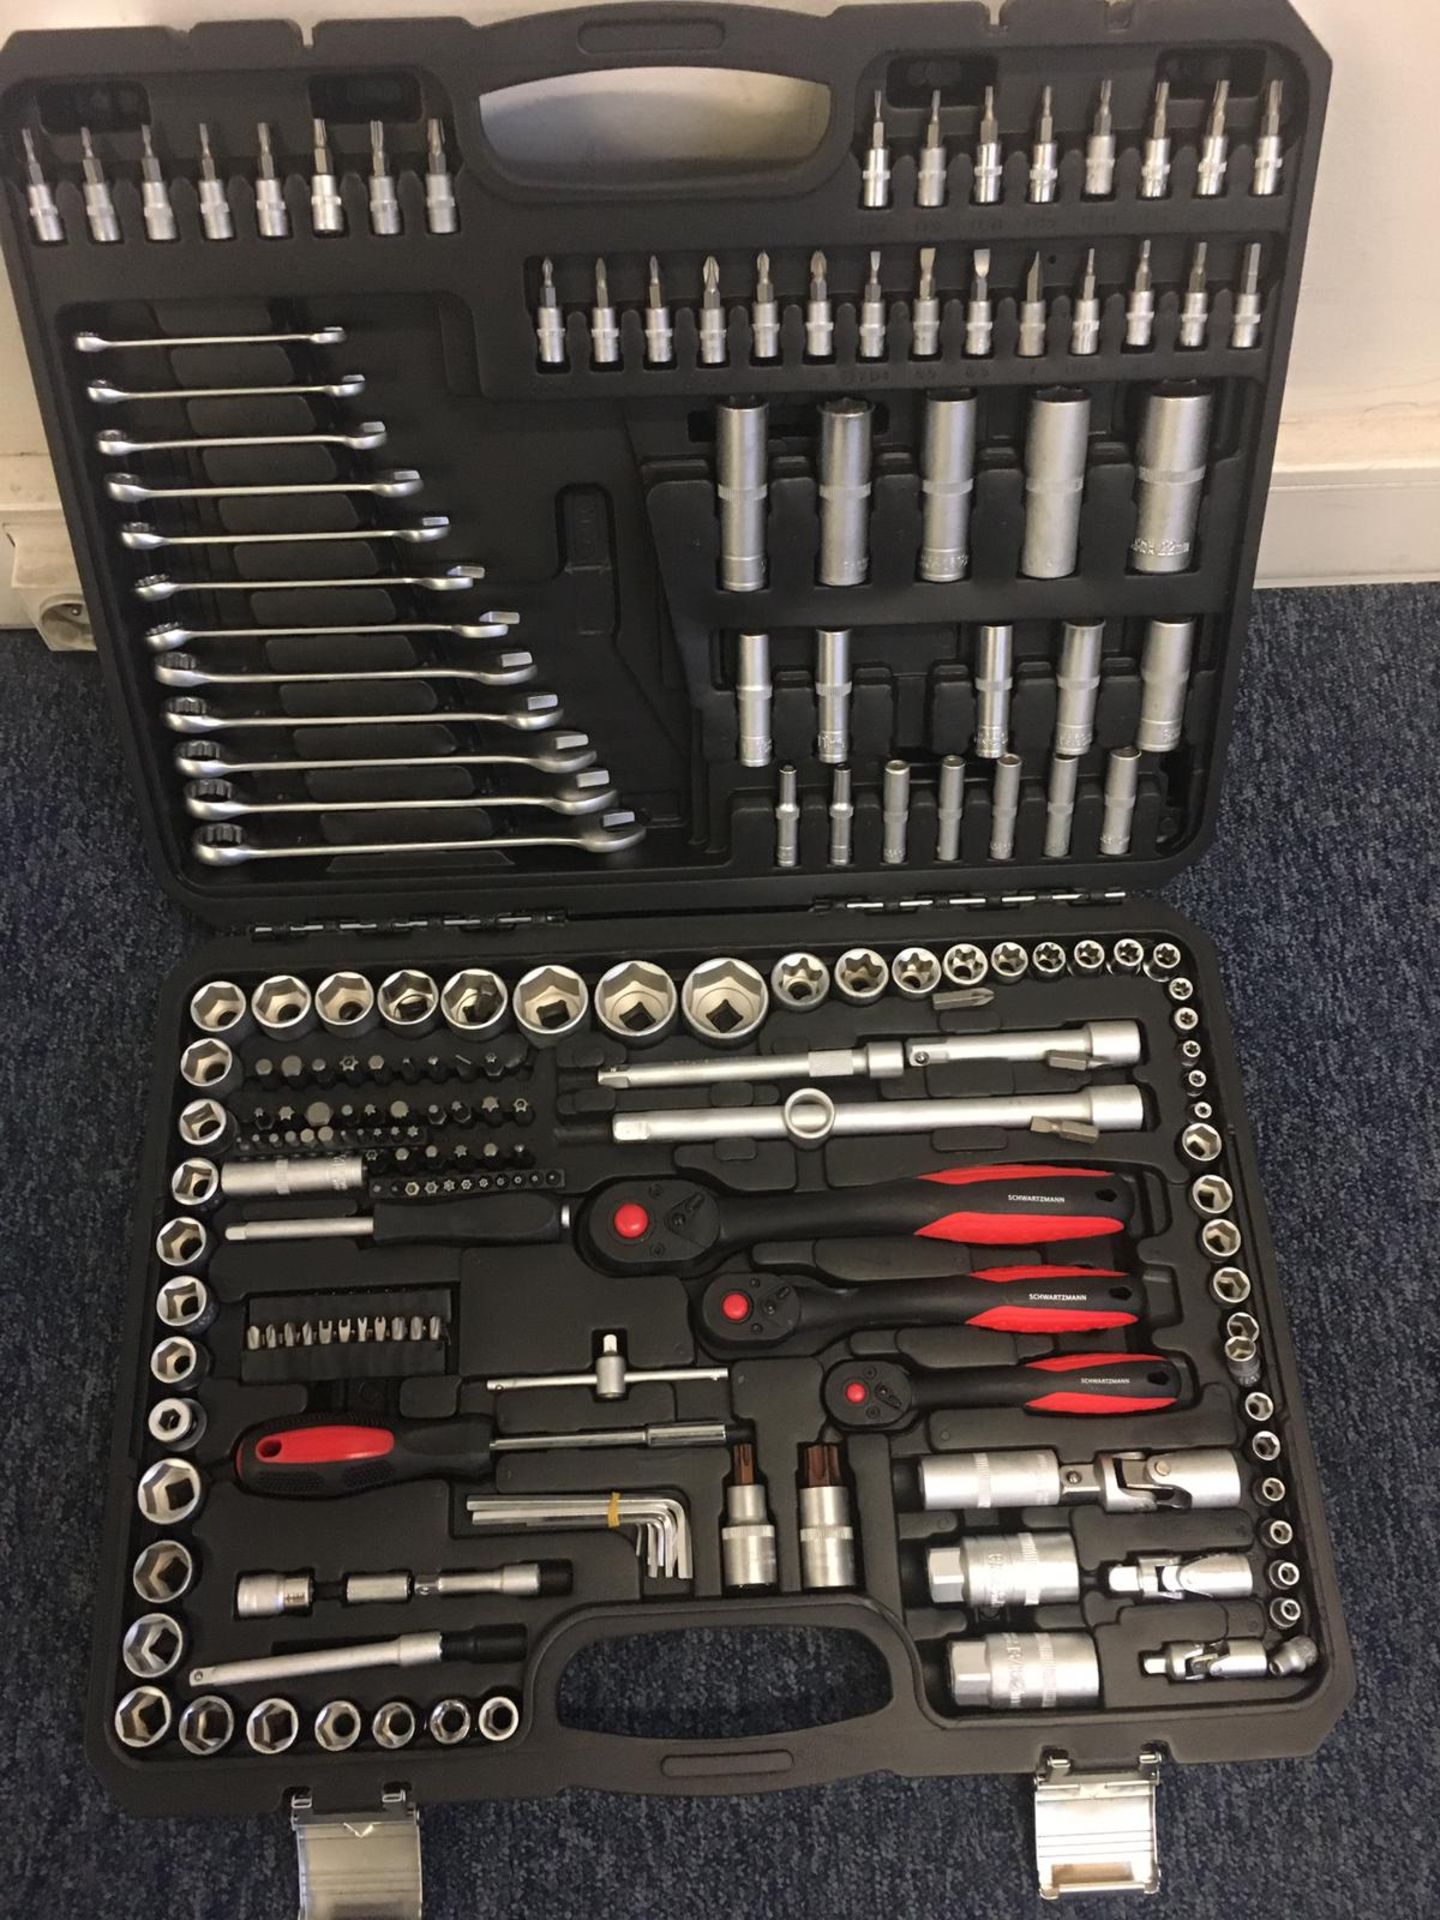 V Brand New Comprehensive Chrome Vanadium Tool Set In Carry Case Approx 200+ Pieces ISP £154.06 (